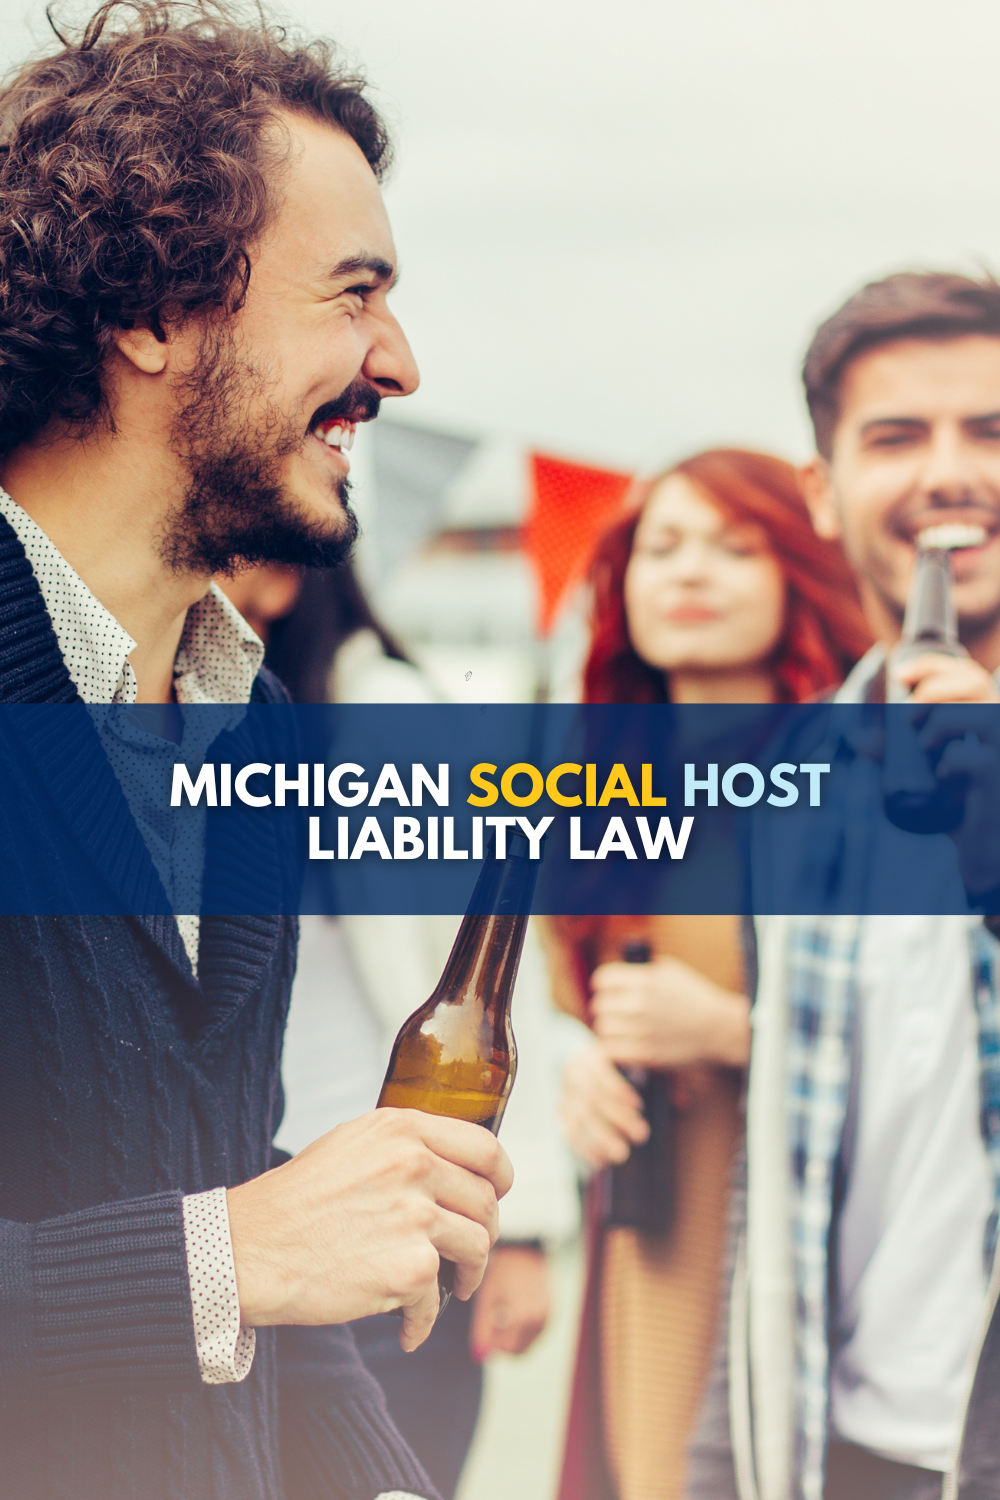 Michigan Social Host Liability Law: What You Need To Know